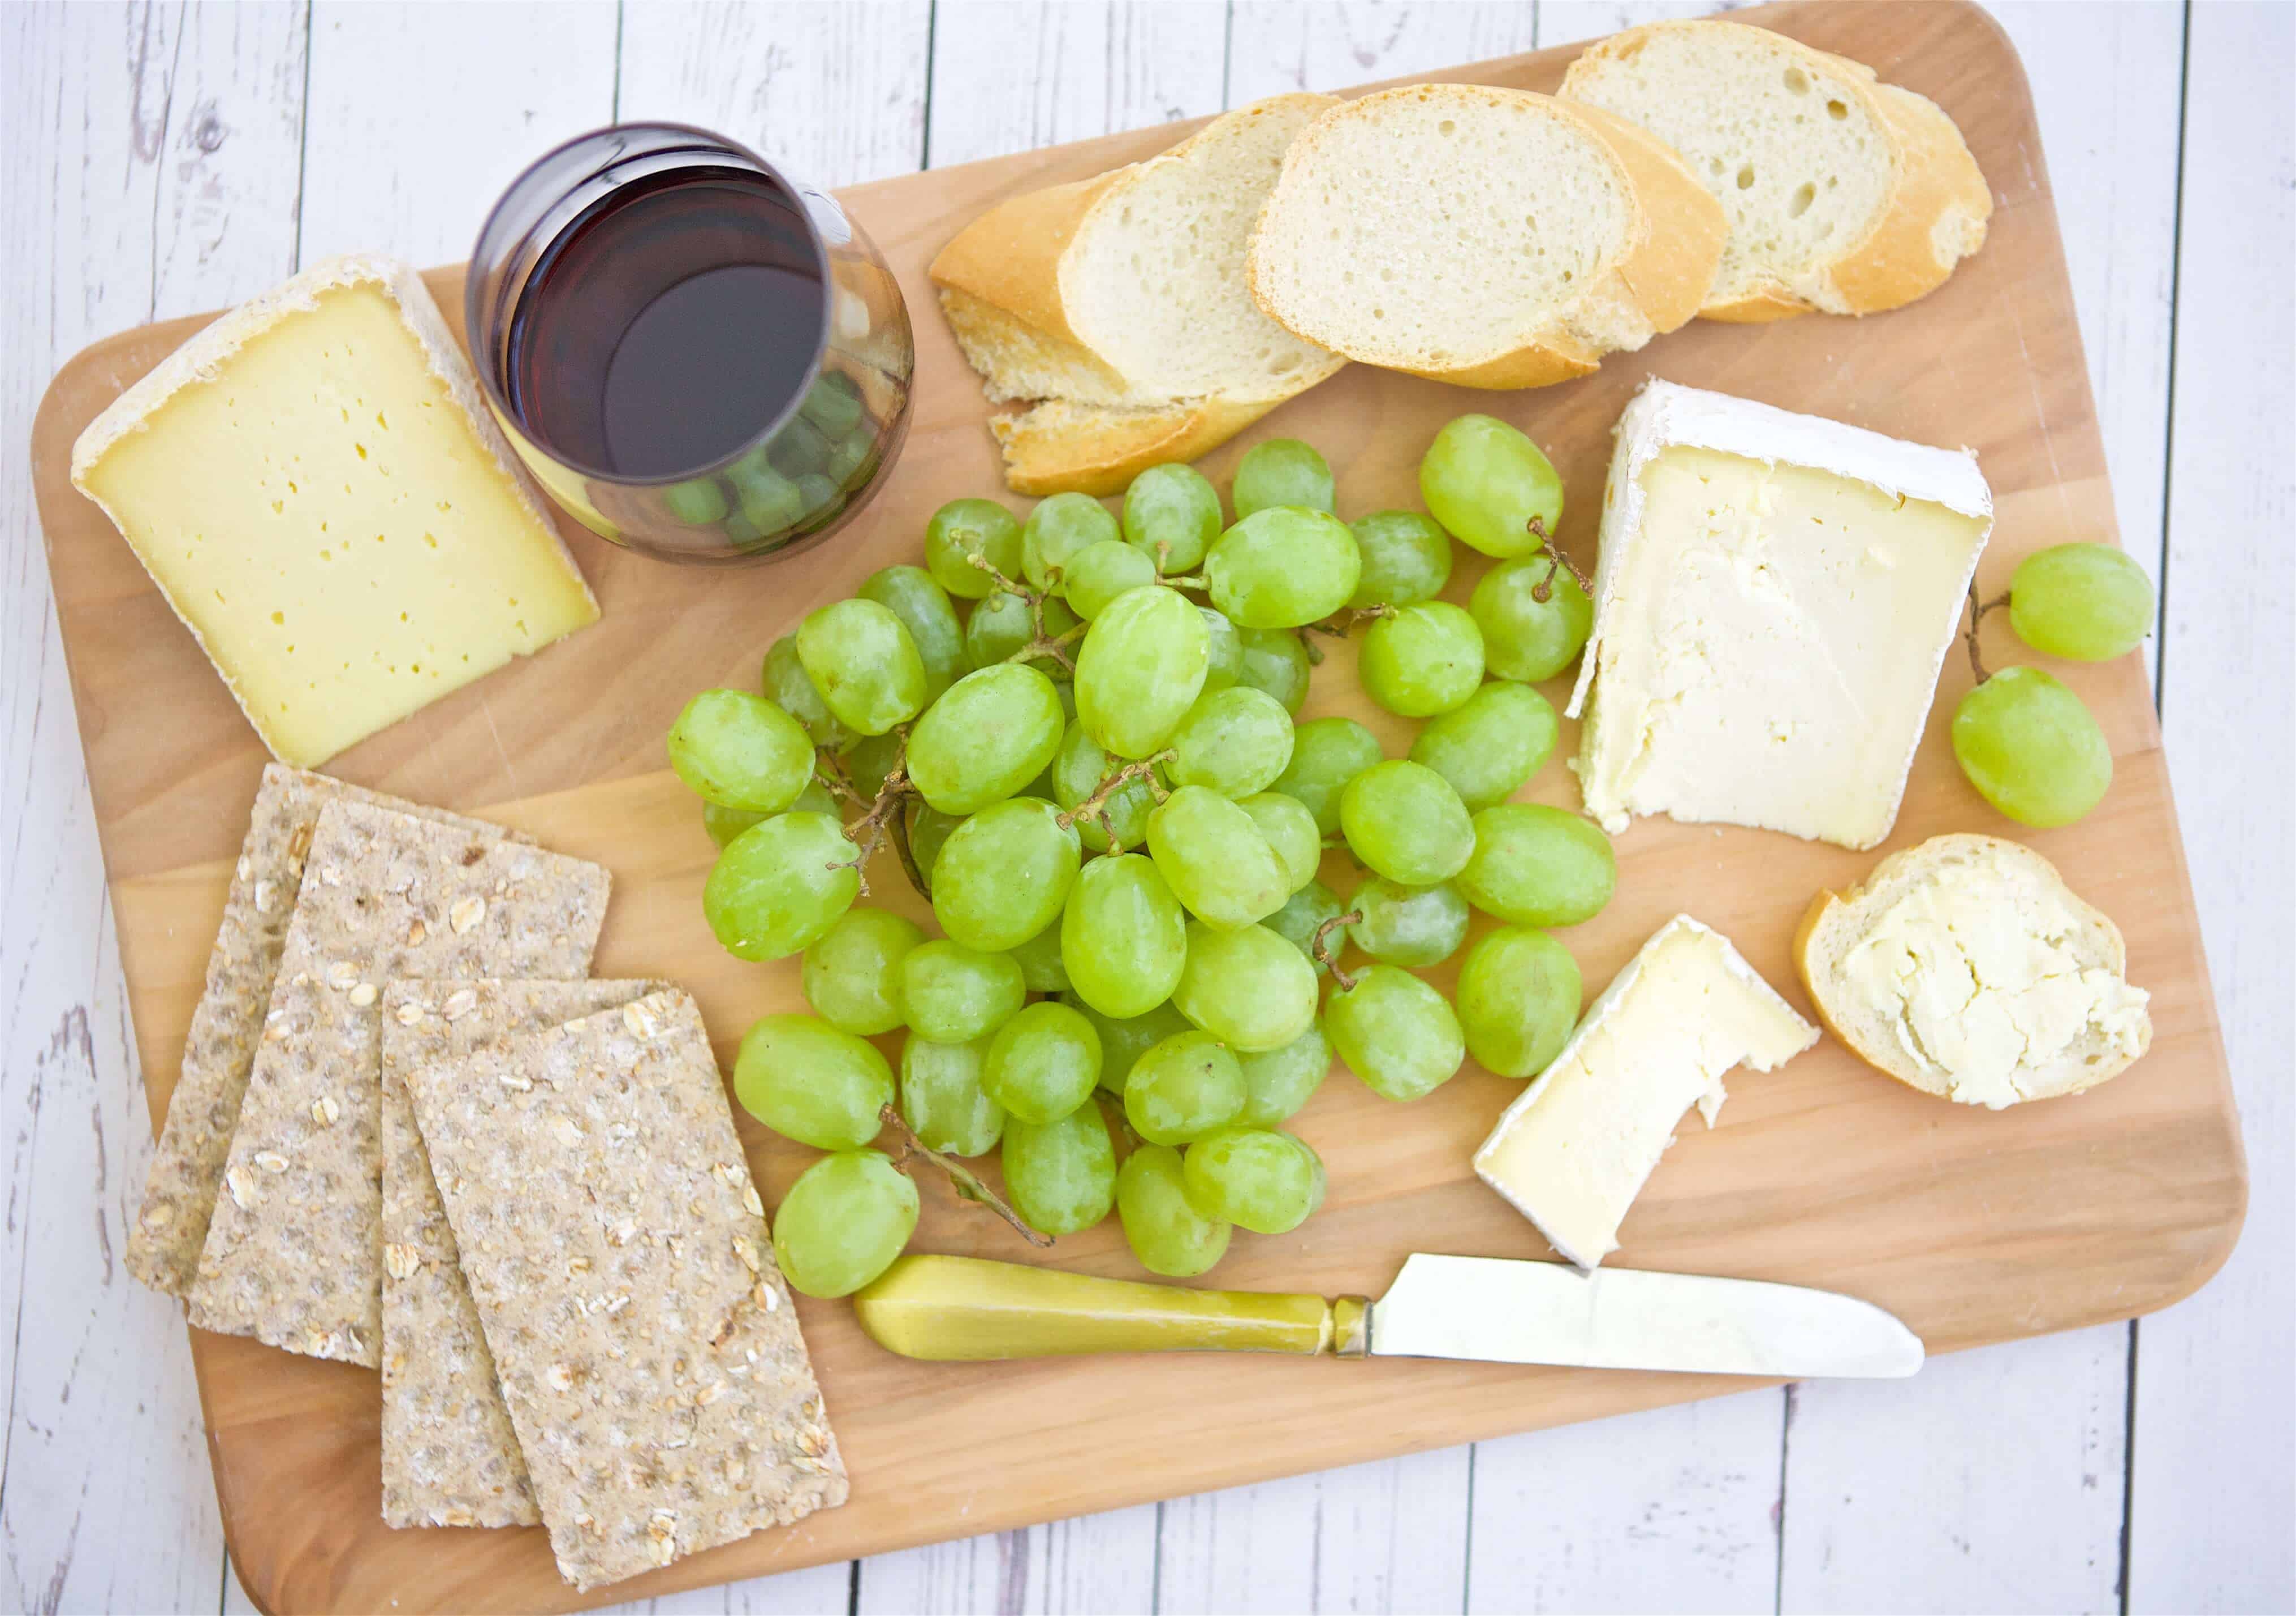 Grapes and cheese are the perfect appetizer for any occasion, no matter the time of year. Here are three cheese platter ideas to meet any need or level of sophistication.